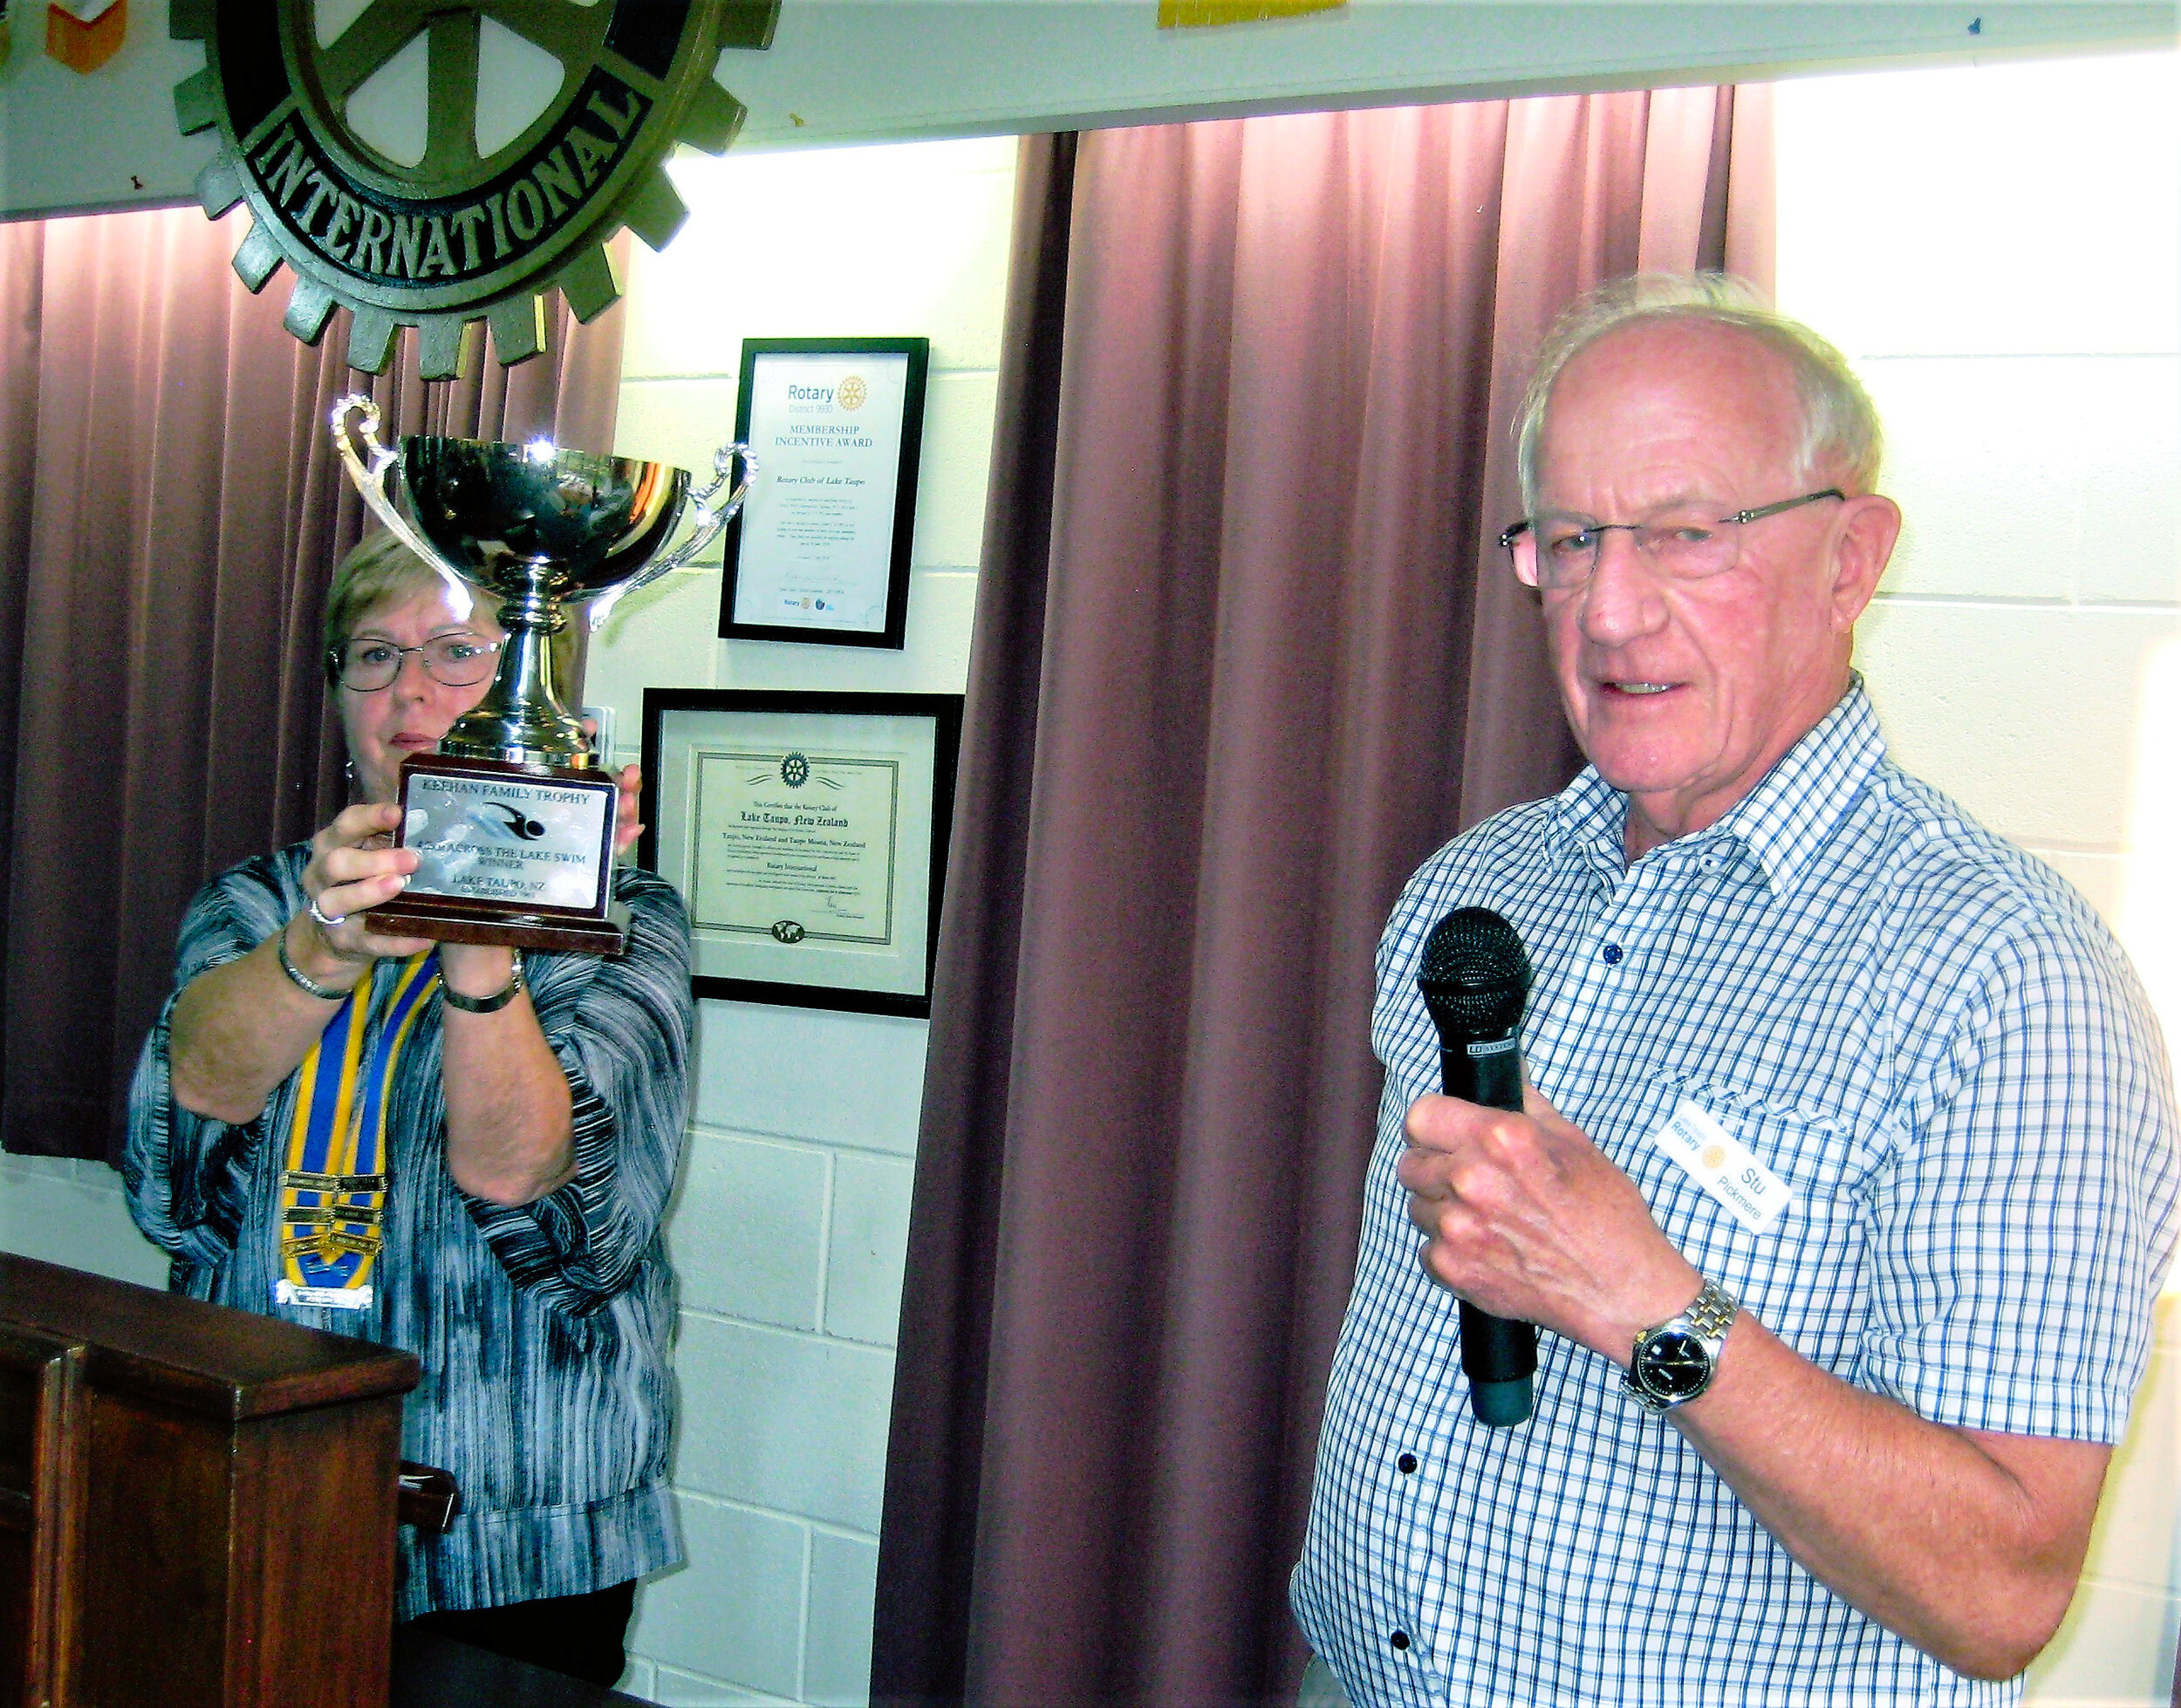 20. President Mary Legg with Stu Pickmere and the Across the Lake trophy 8 March 2021.JPG